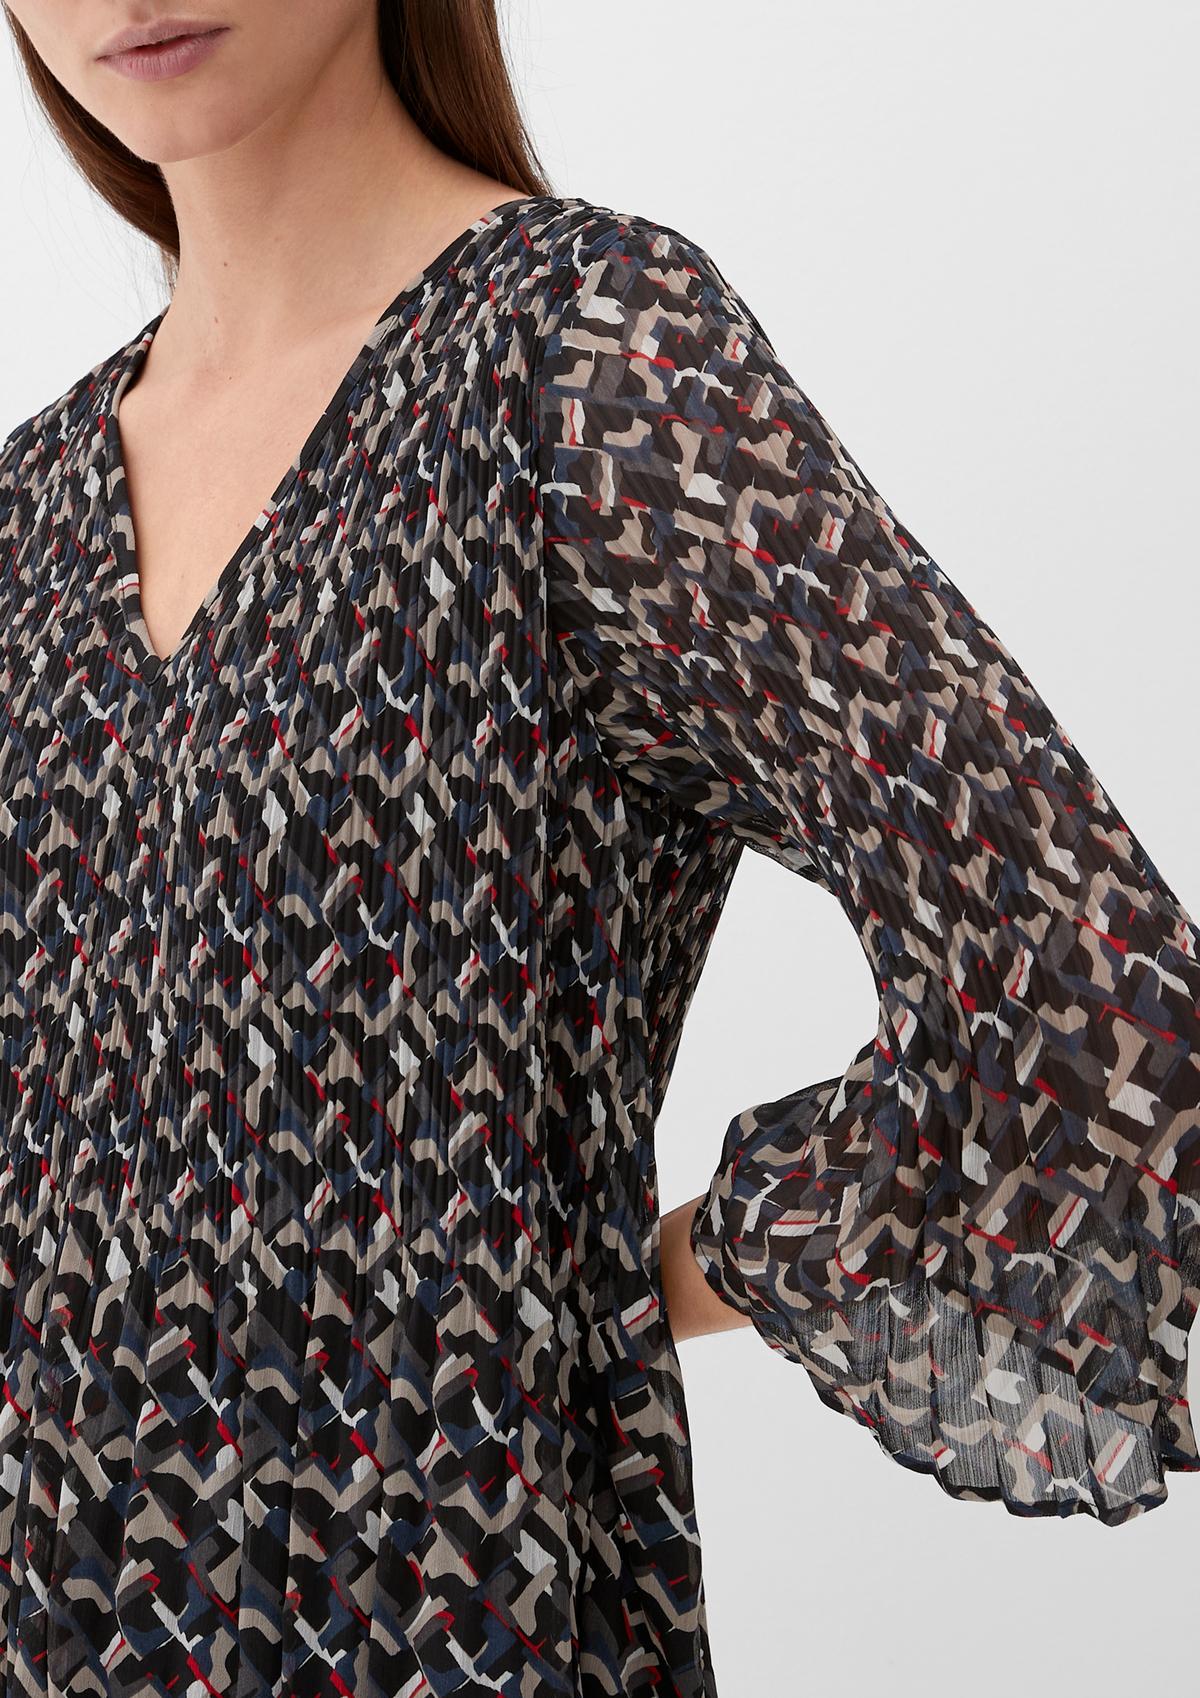 s.Oliver Blouse top with a pleated texture